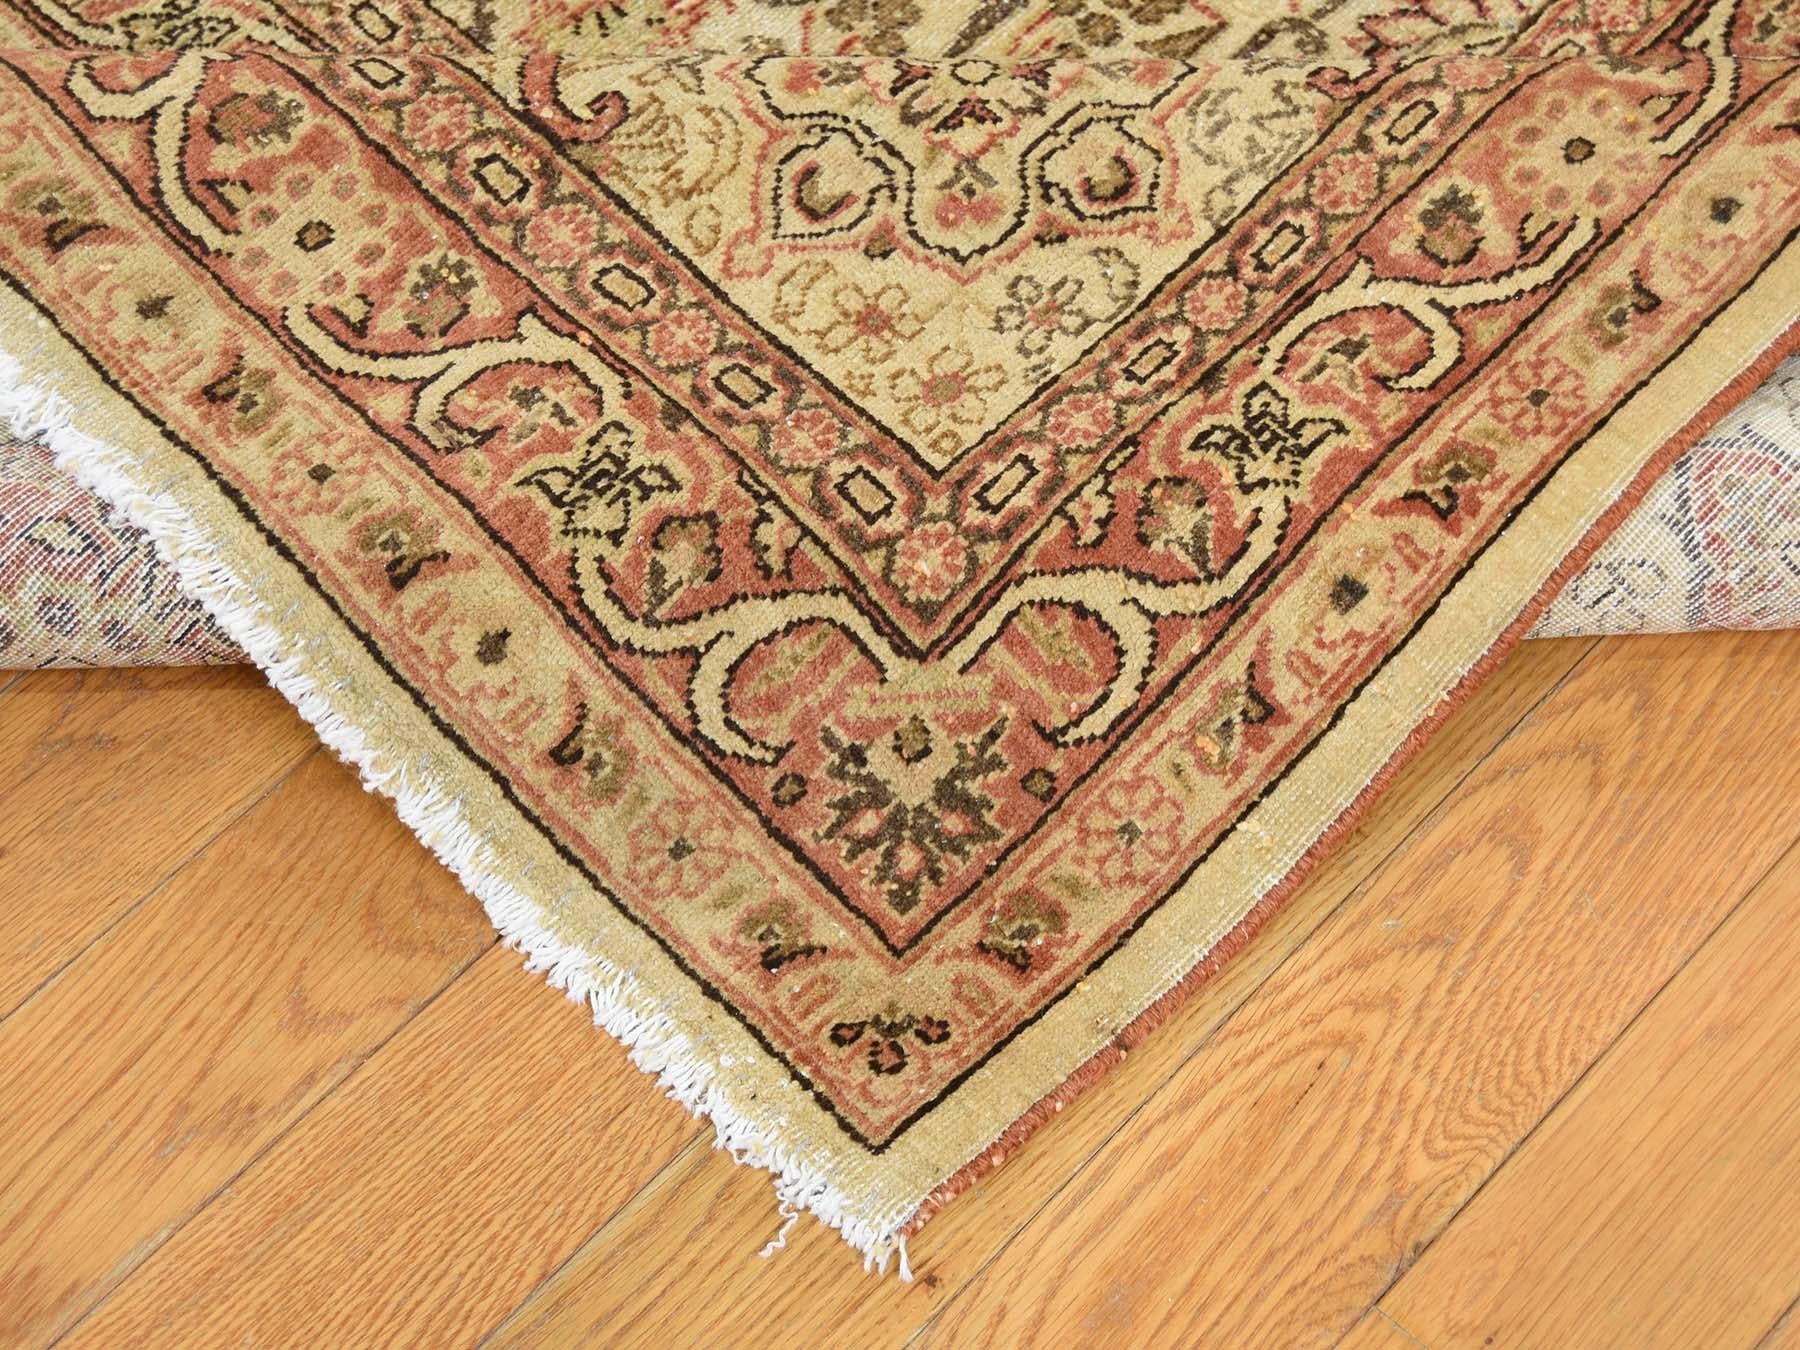 1920 Vintage Persian Tabriz Hand-Knotted Wool Full Pile Rug  4